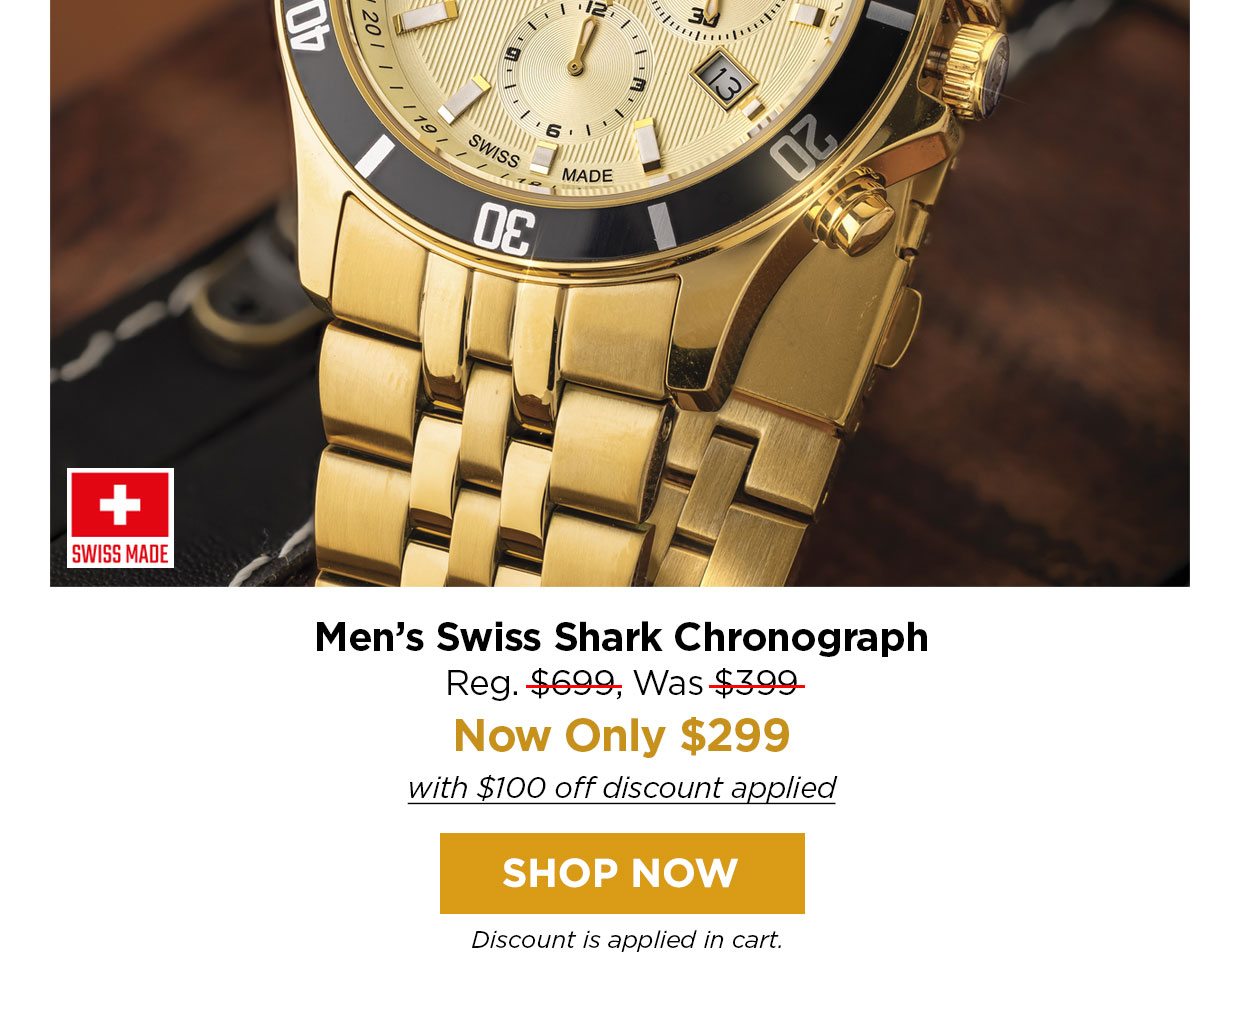 Men's Swiss Shark Chronograph Reg. $699, Was $399, Now Only $299 with $100 off discount applied. Shop Now button. Discount applied in cart.